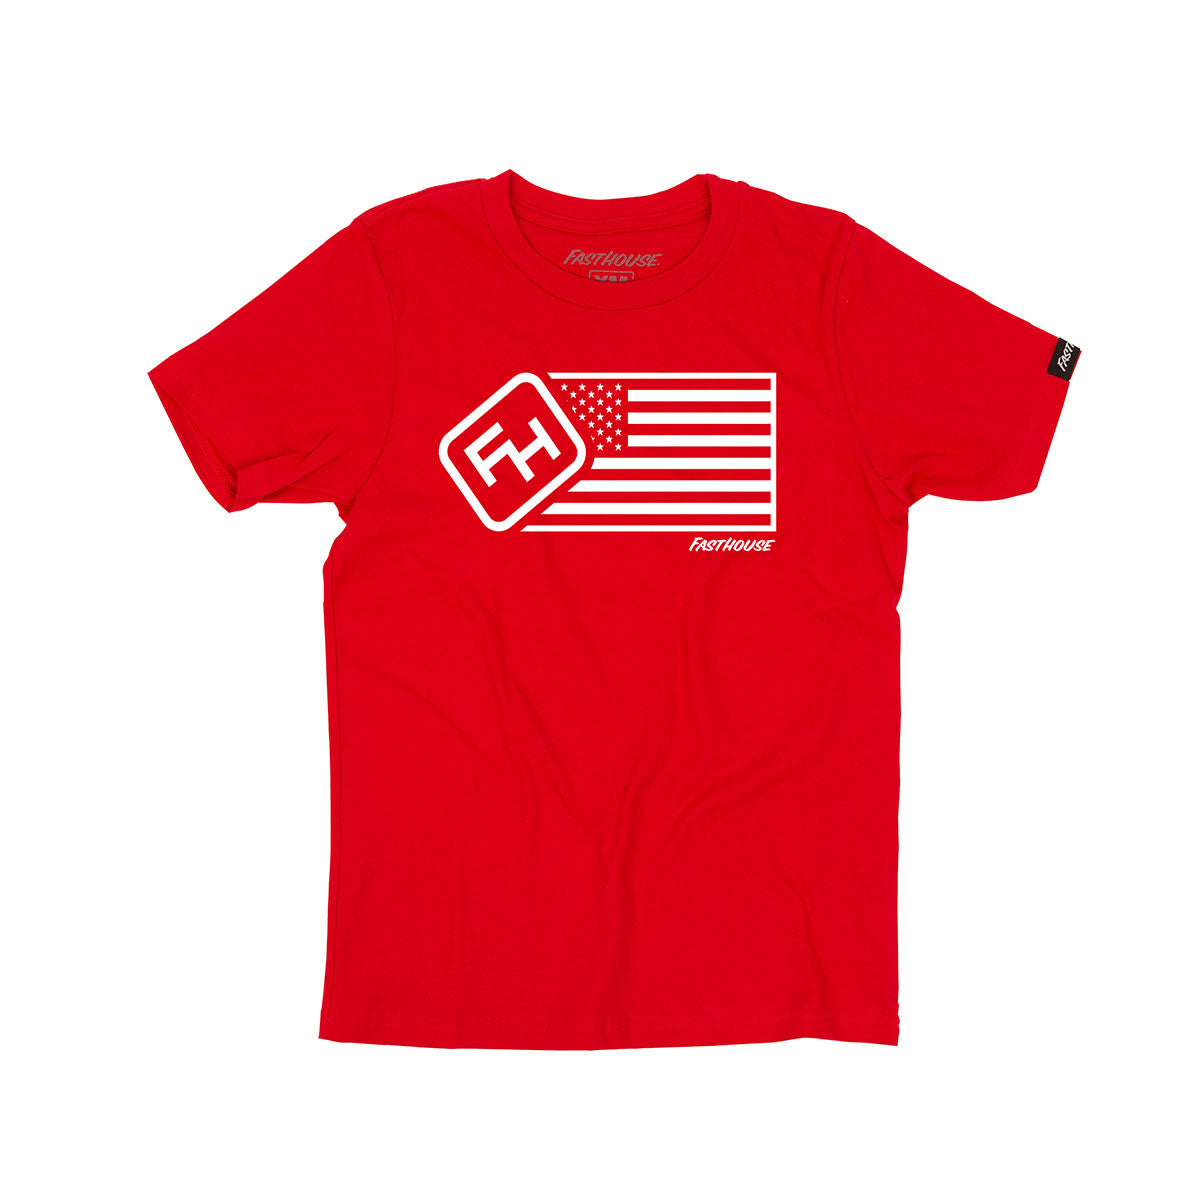 Fasthouse - USA Youth Tee - Red